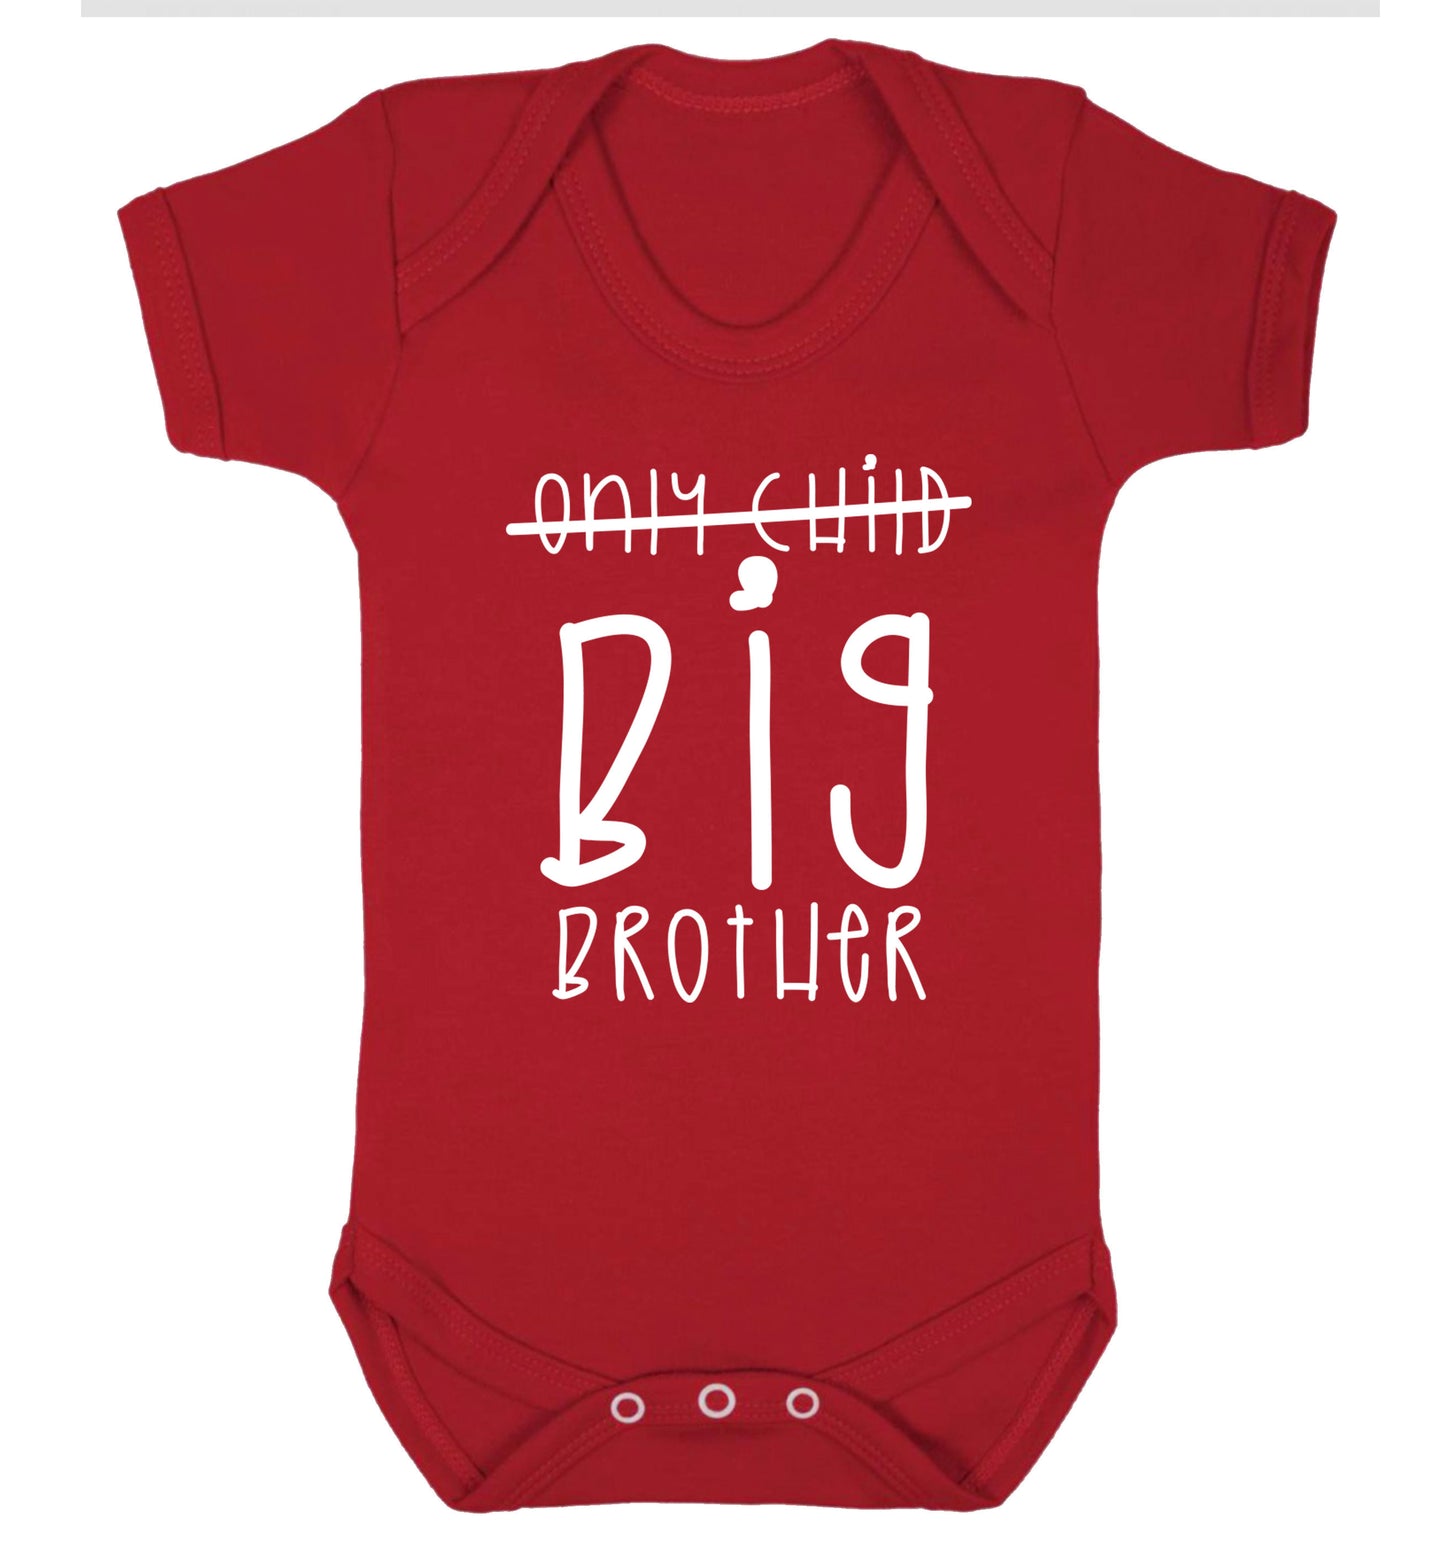 Only child big brother Baby Vest red 18-24 months